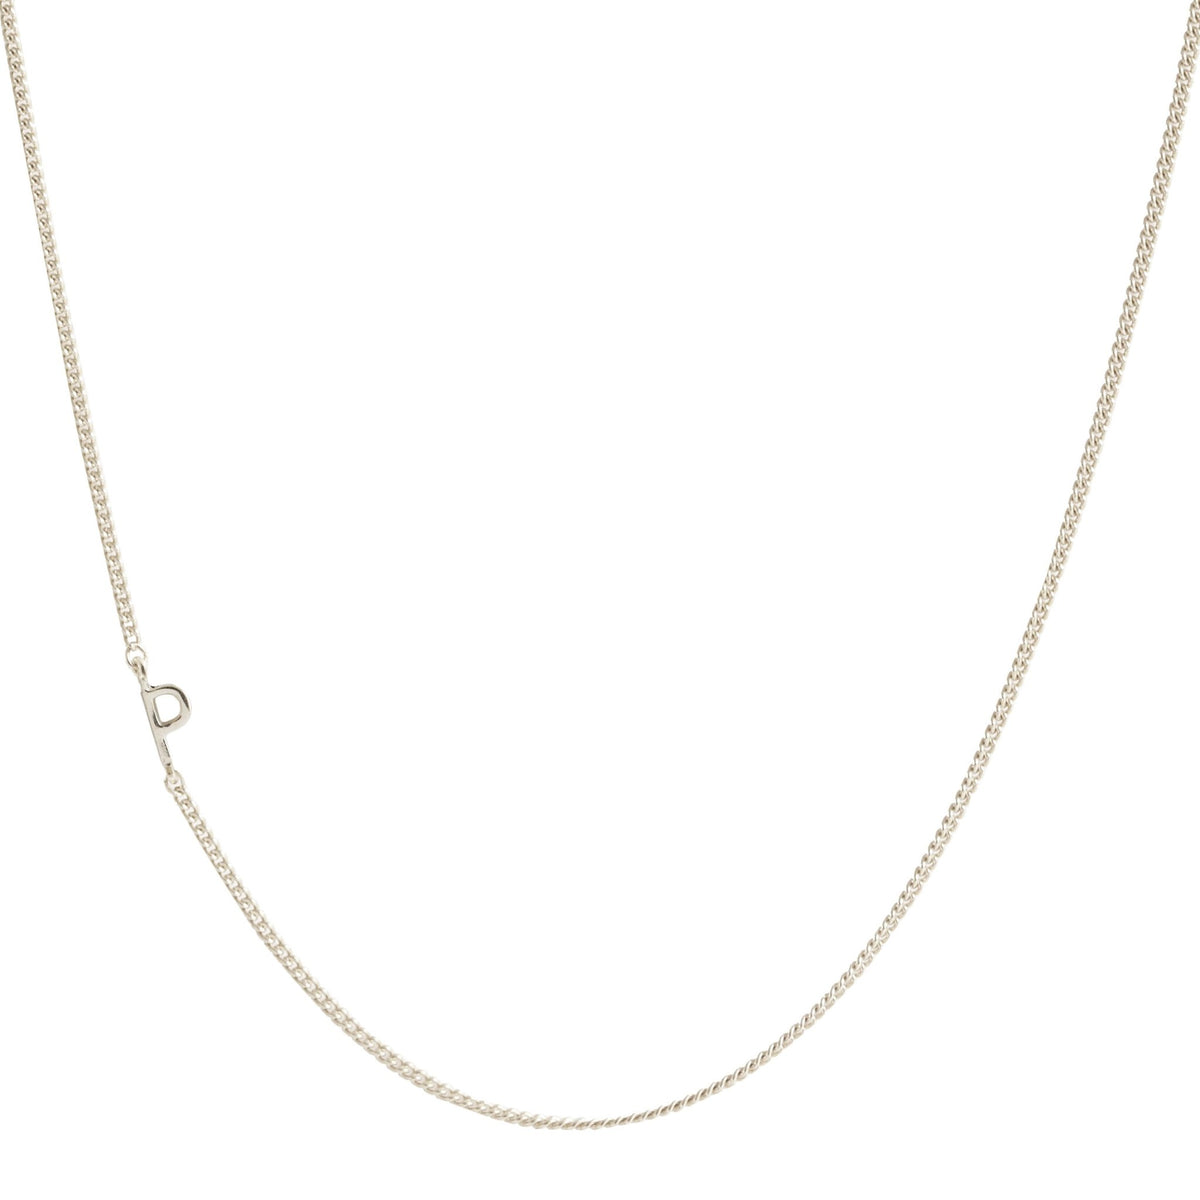 NOTABLE OFFSET INITIAL NECKLACE - P - GOLD, ROSE GOLD, OR SILVER - SO PRETTY CARA COTTER